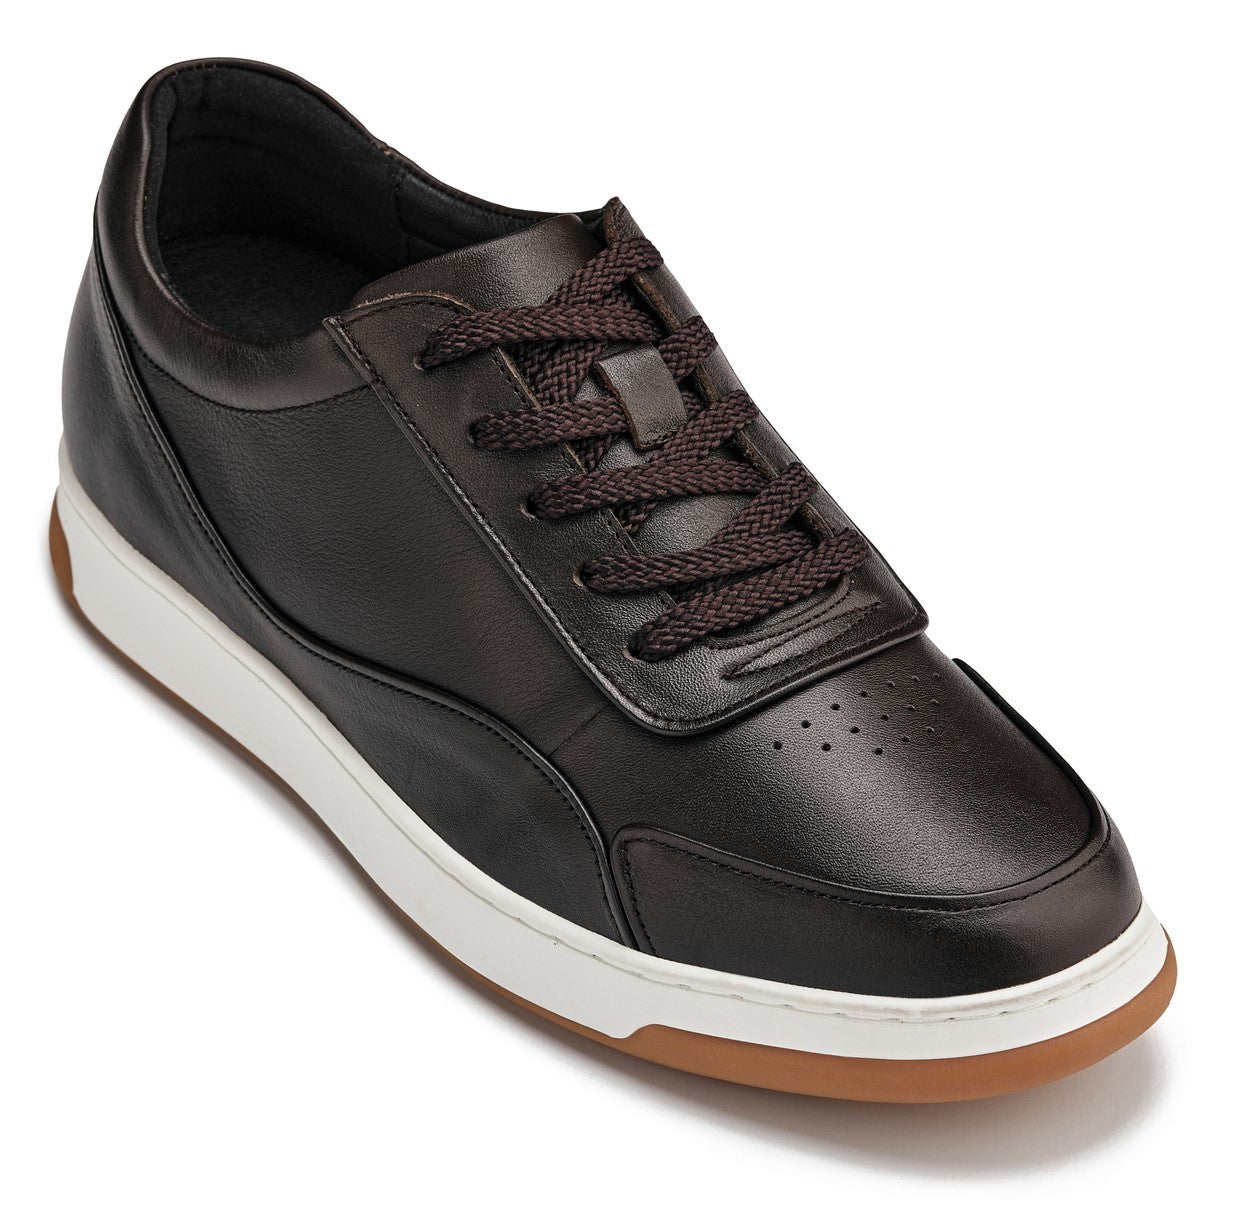 Roadster Canvas Shoes - Buy Roadster Canvas Shoes online in India